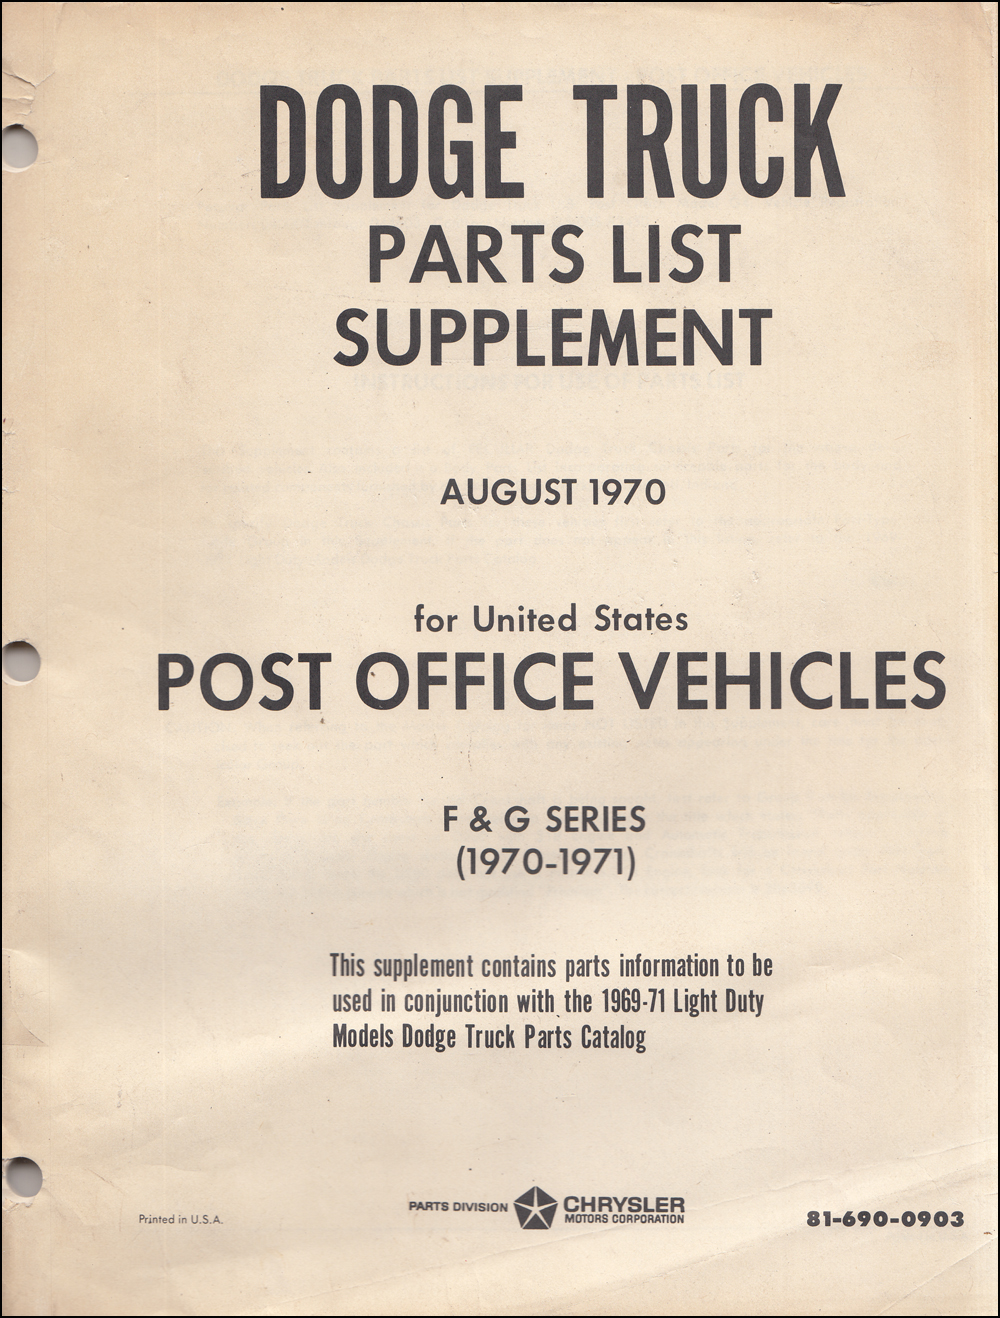 1970-1971 Dodge Truck Post Office Vehicles Parts List Supplement for G4/G-400 with Wayne body